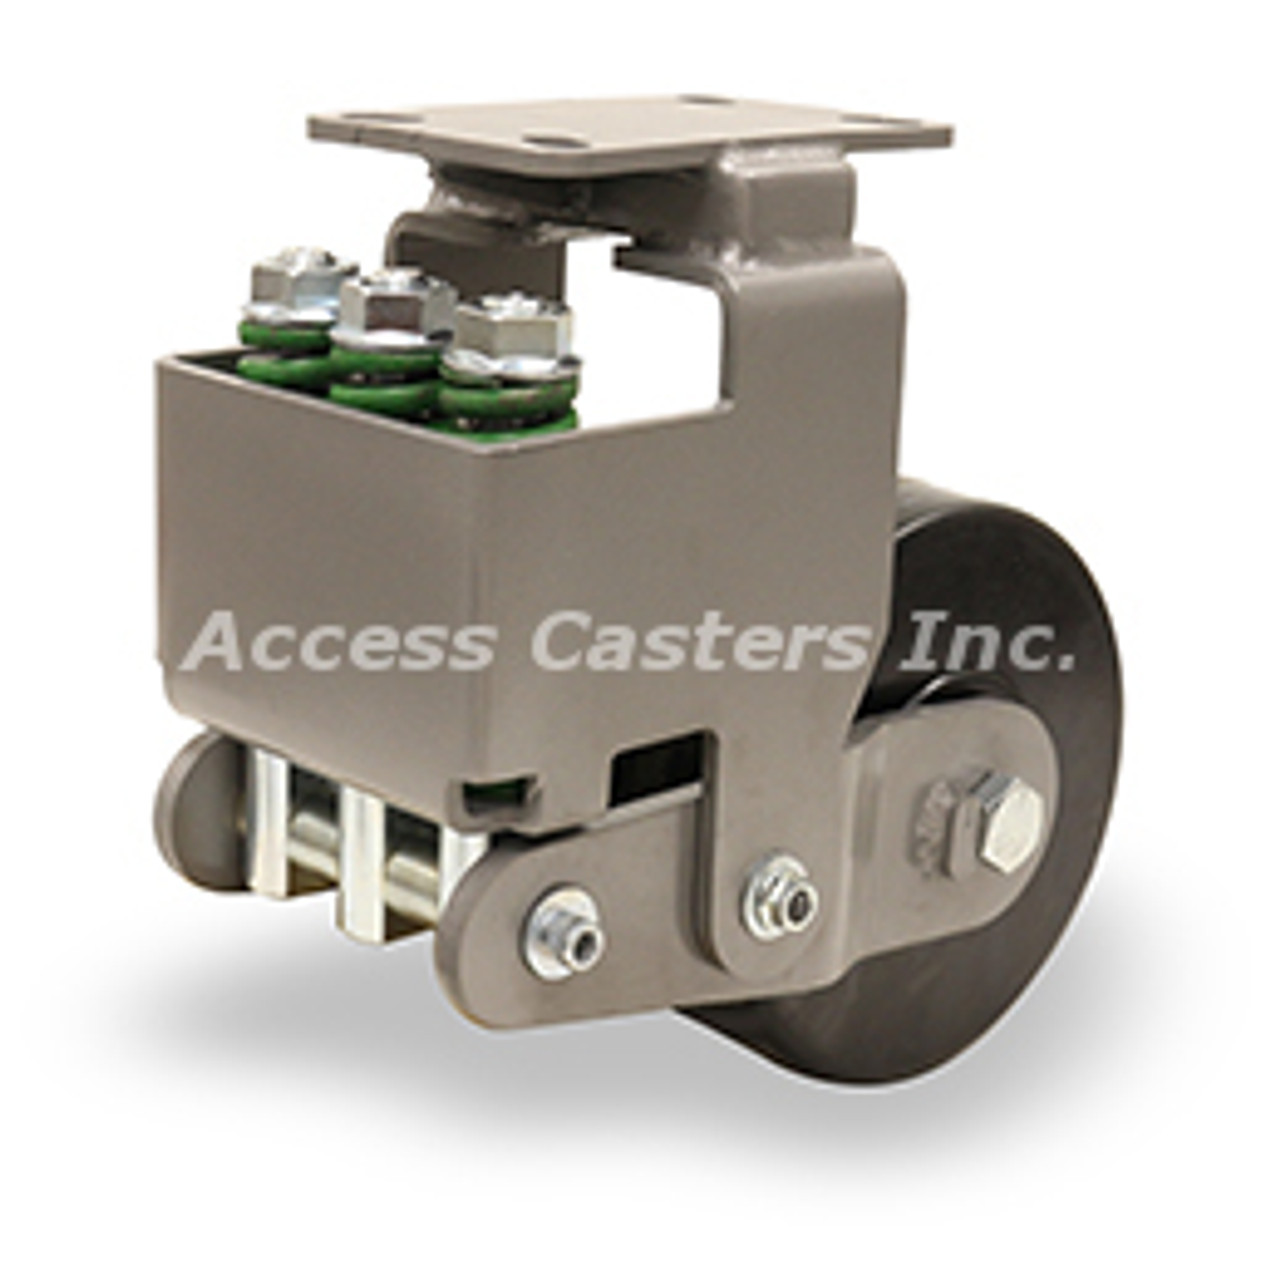 R-AEZFFM-83PH Spring loaded caster with 8" x 3" PH wheel